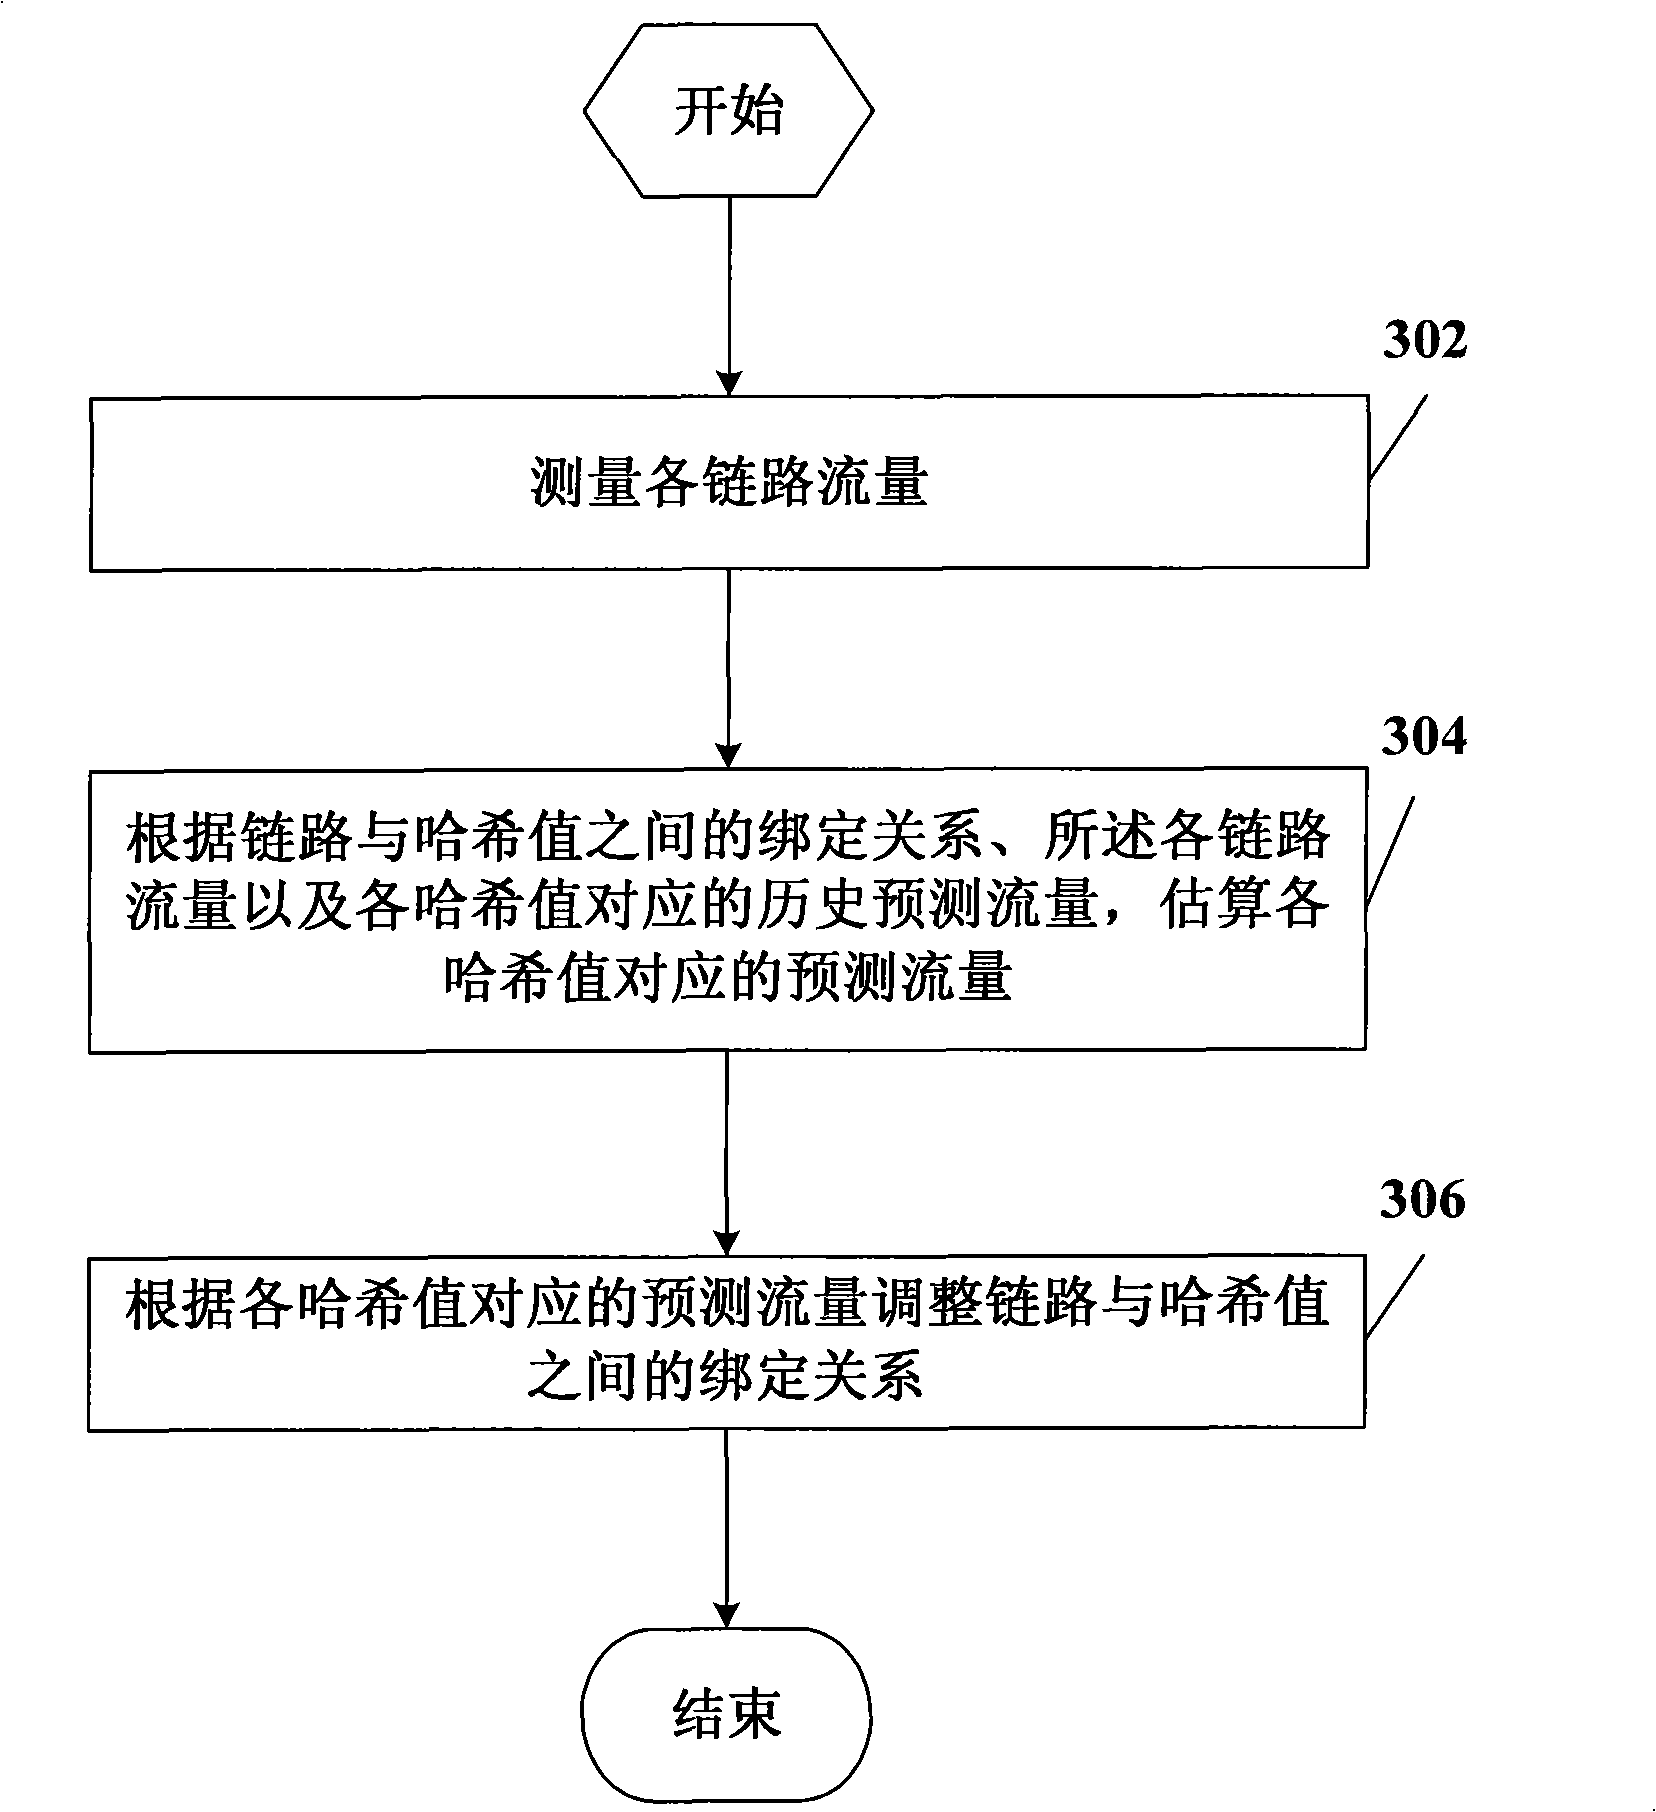 Method and apparatus for regulating load share